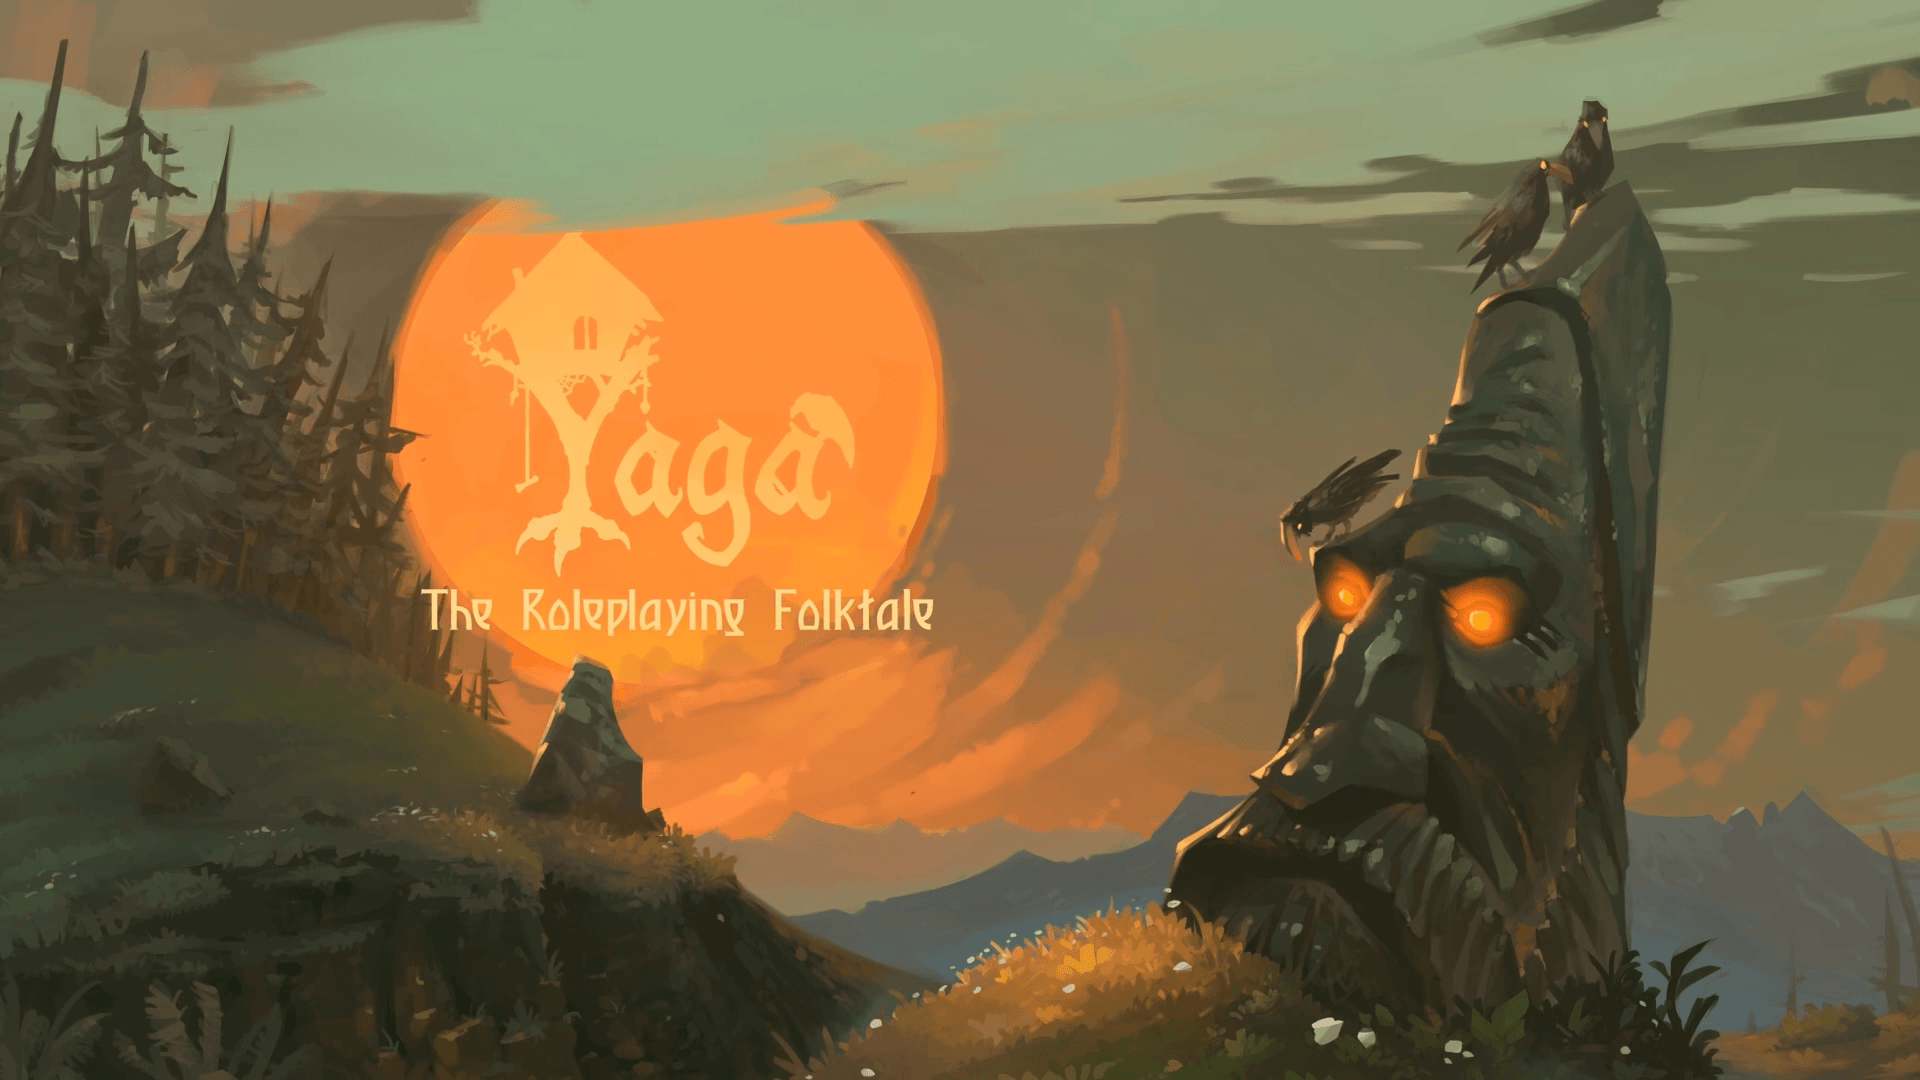 Action RPG Yaga Is Available For Preorder, Release Set